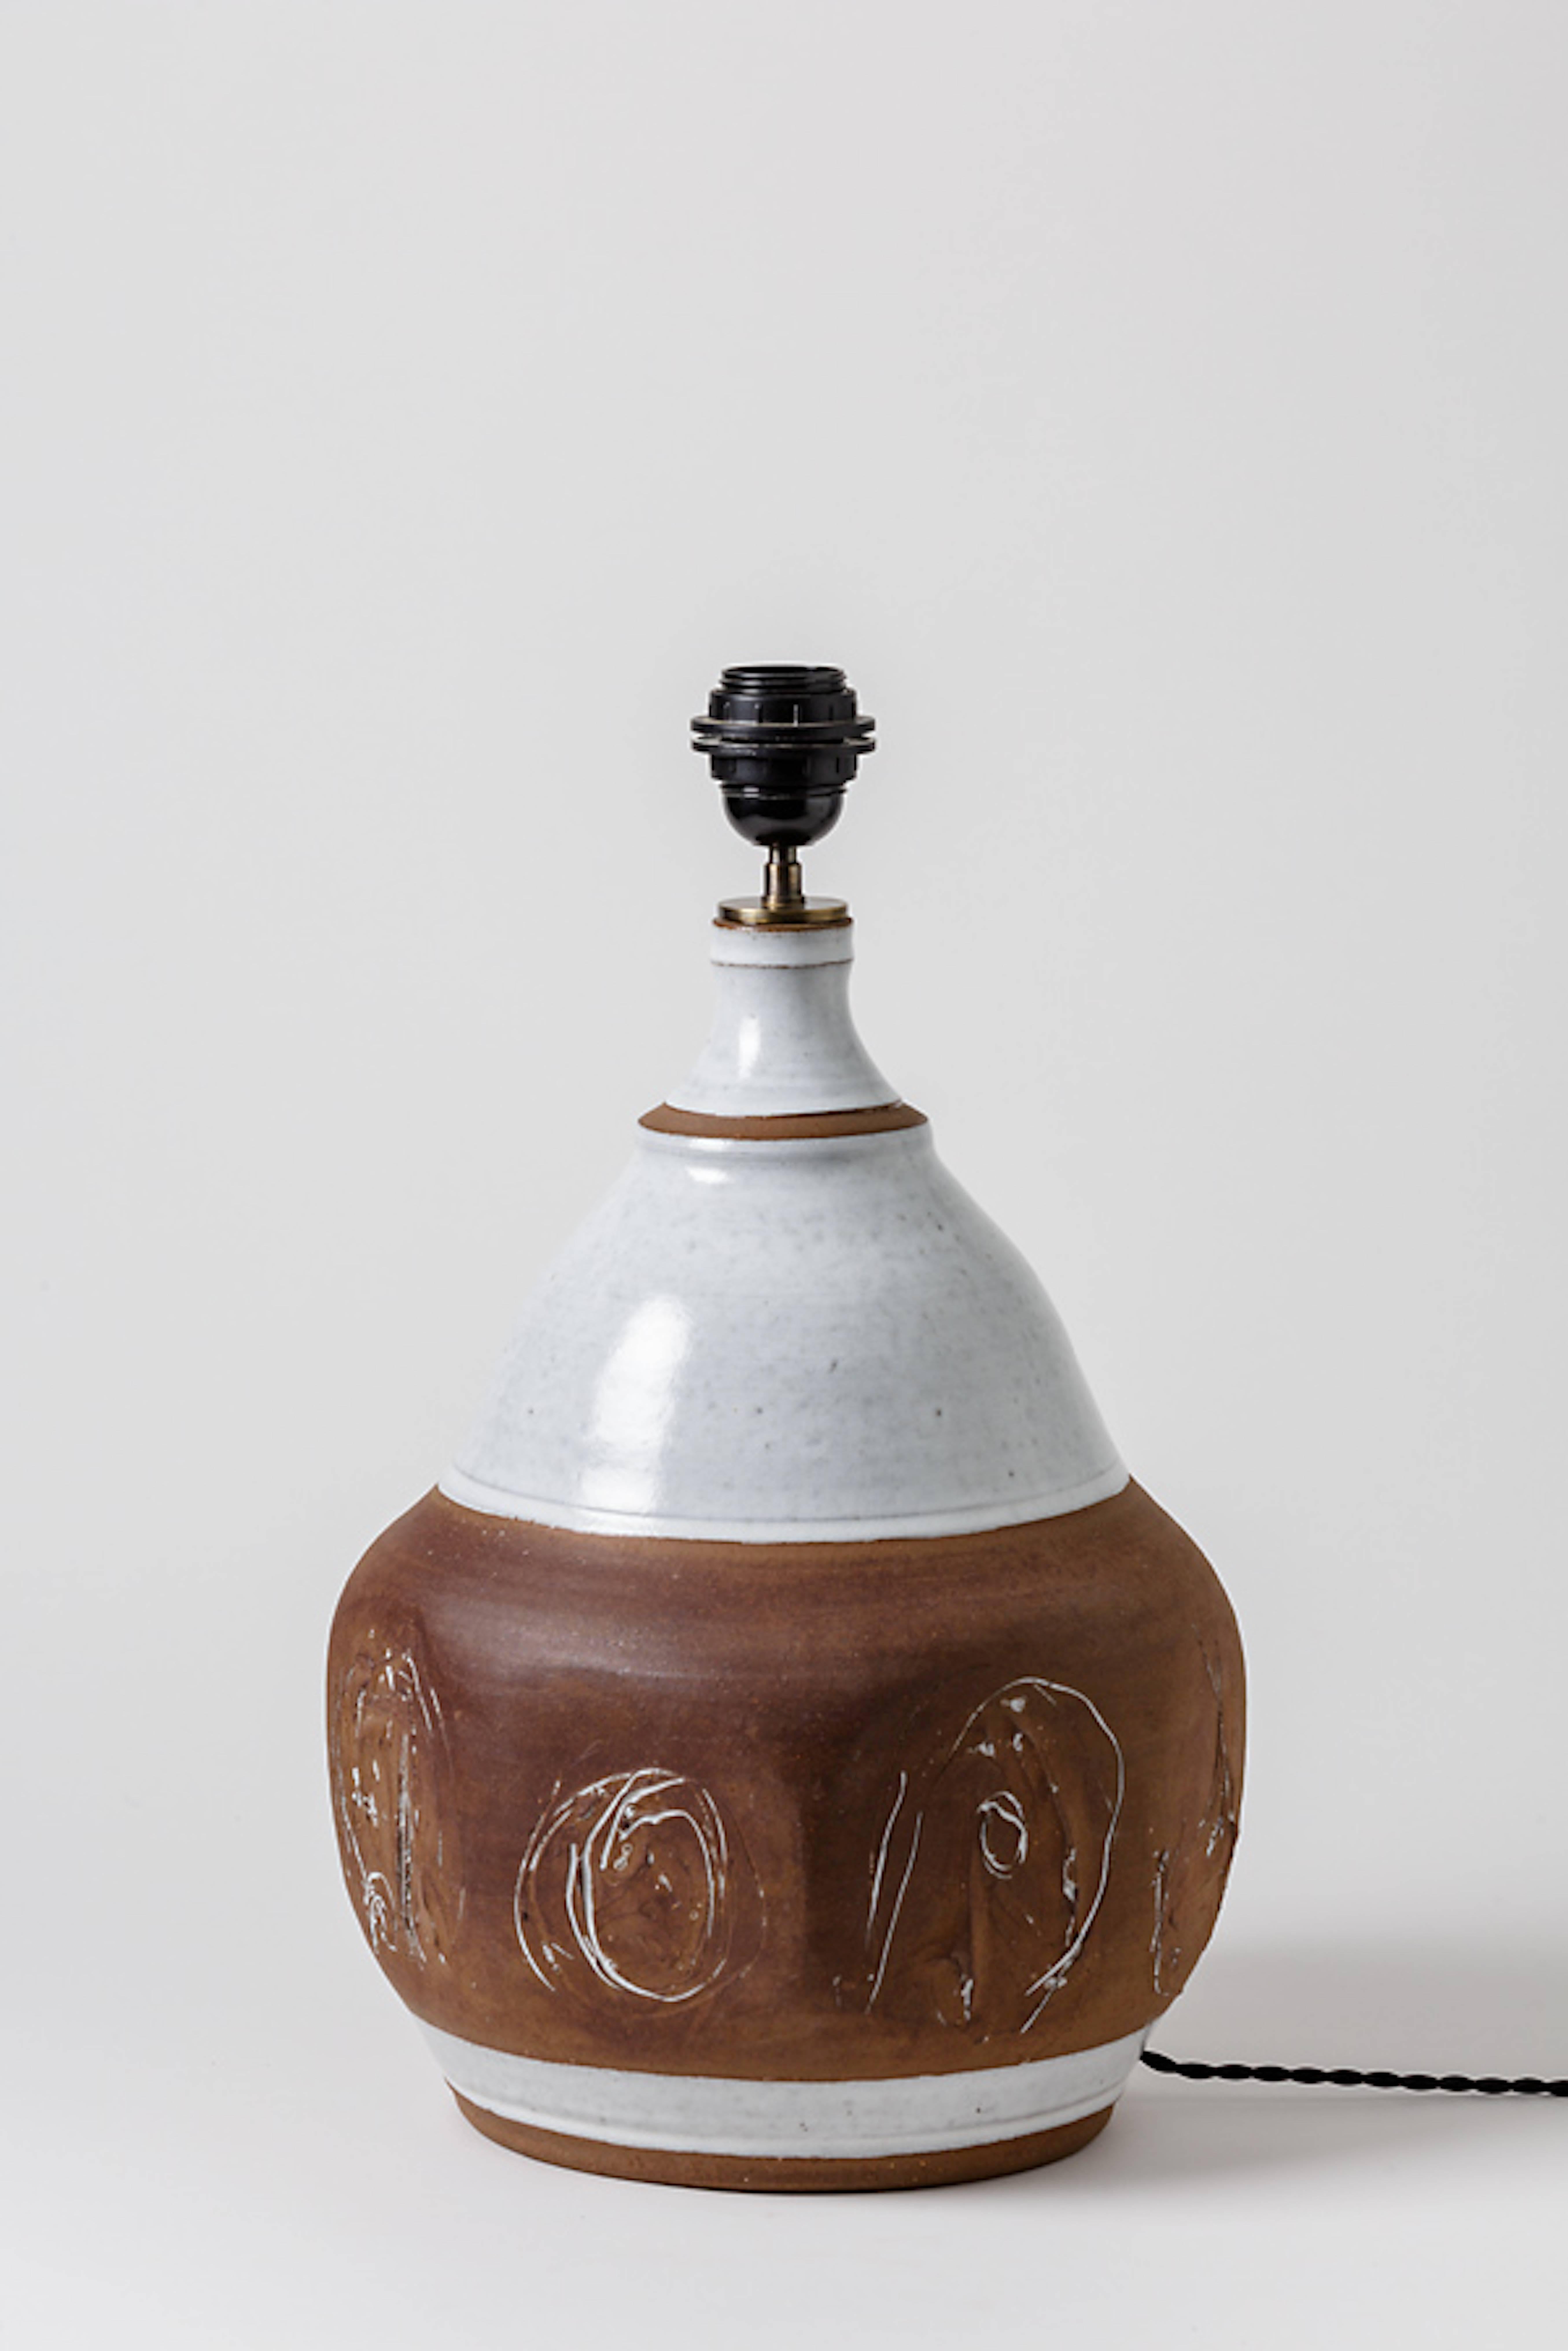 Turned White and Brown Stoneware Ceramic Table Lamp by Roger Collet, circa 1970 For Sale